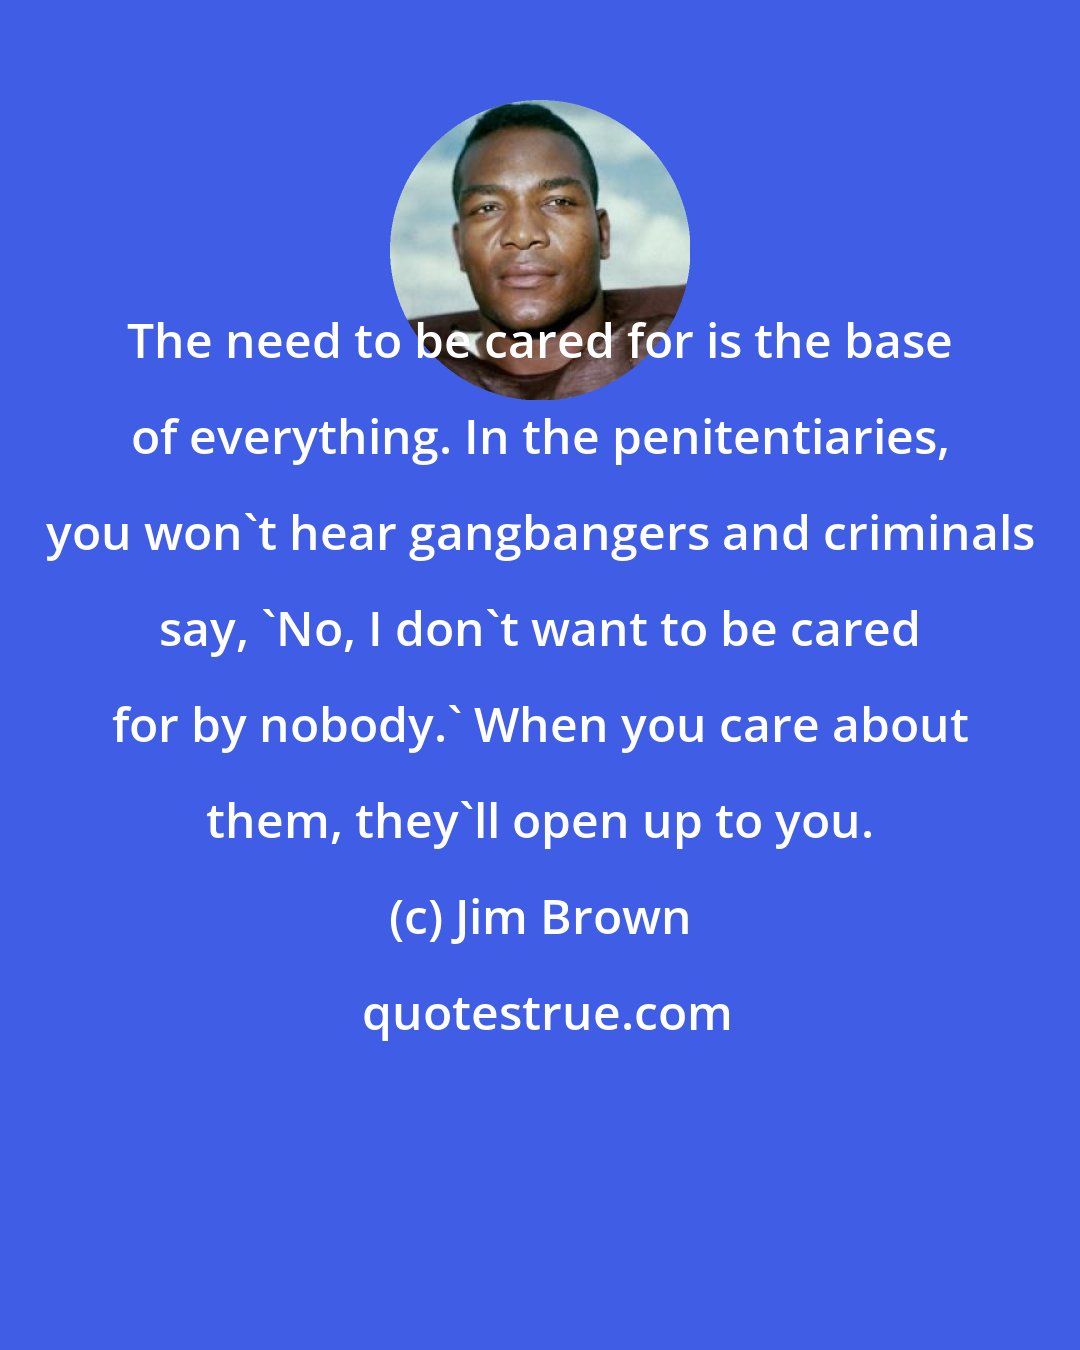 Jim Brown: The need to be cared for is the base of everything. In the penitentiaries, you won't hear gangbangers and criminals say, 'No, I don't want to be cared for by nobody.' When you care about them, they'll open up to you.